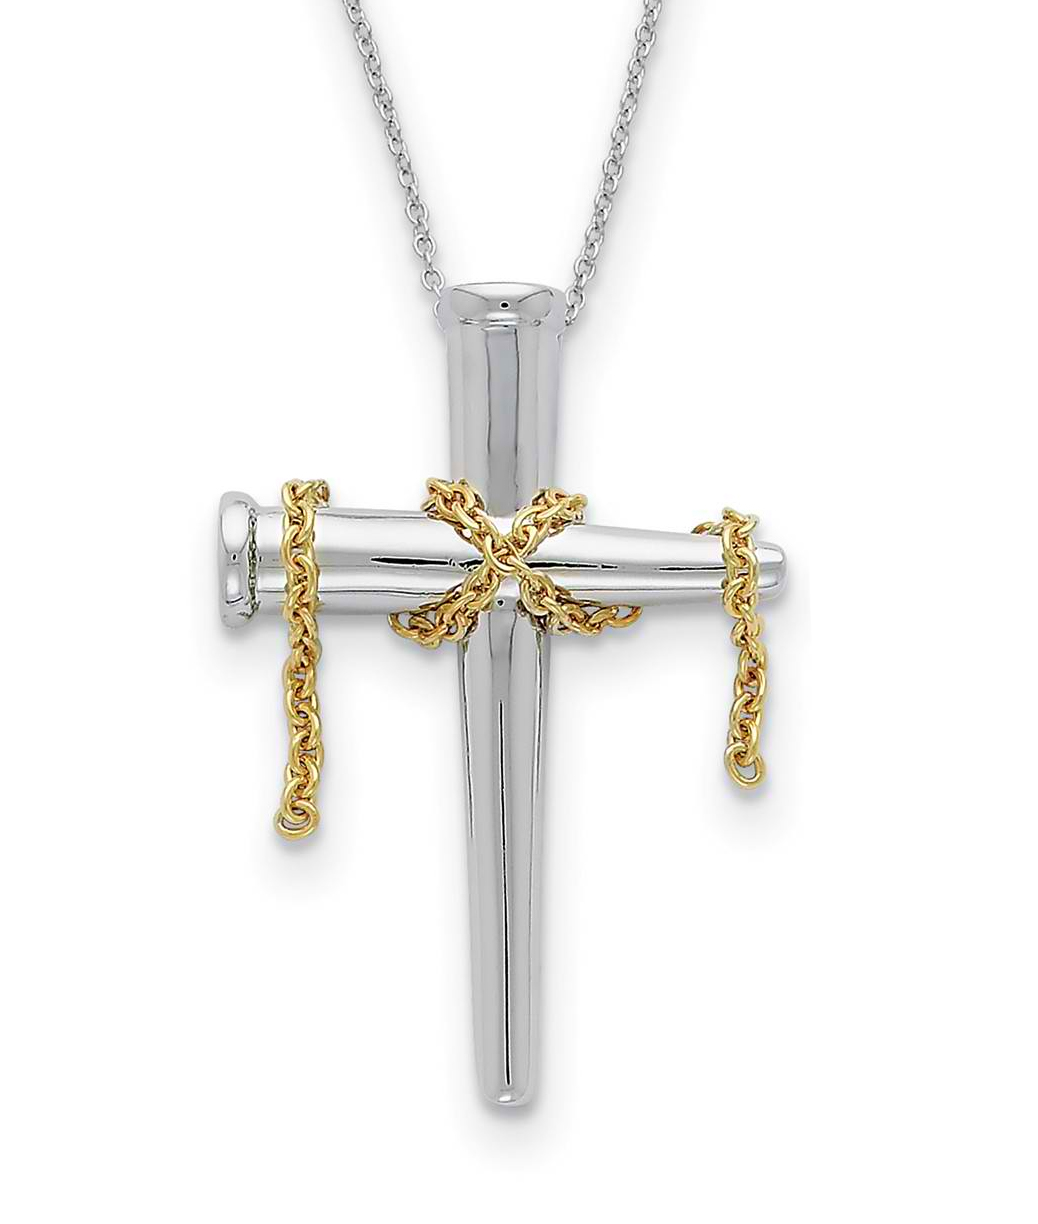 Sterling Silver and Gold-Plated 'It Is Finished' Cross Pendant Necklace, 18